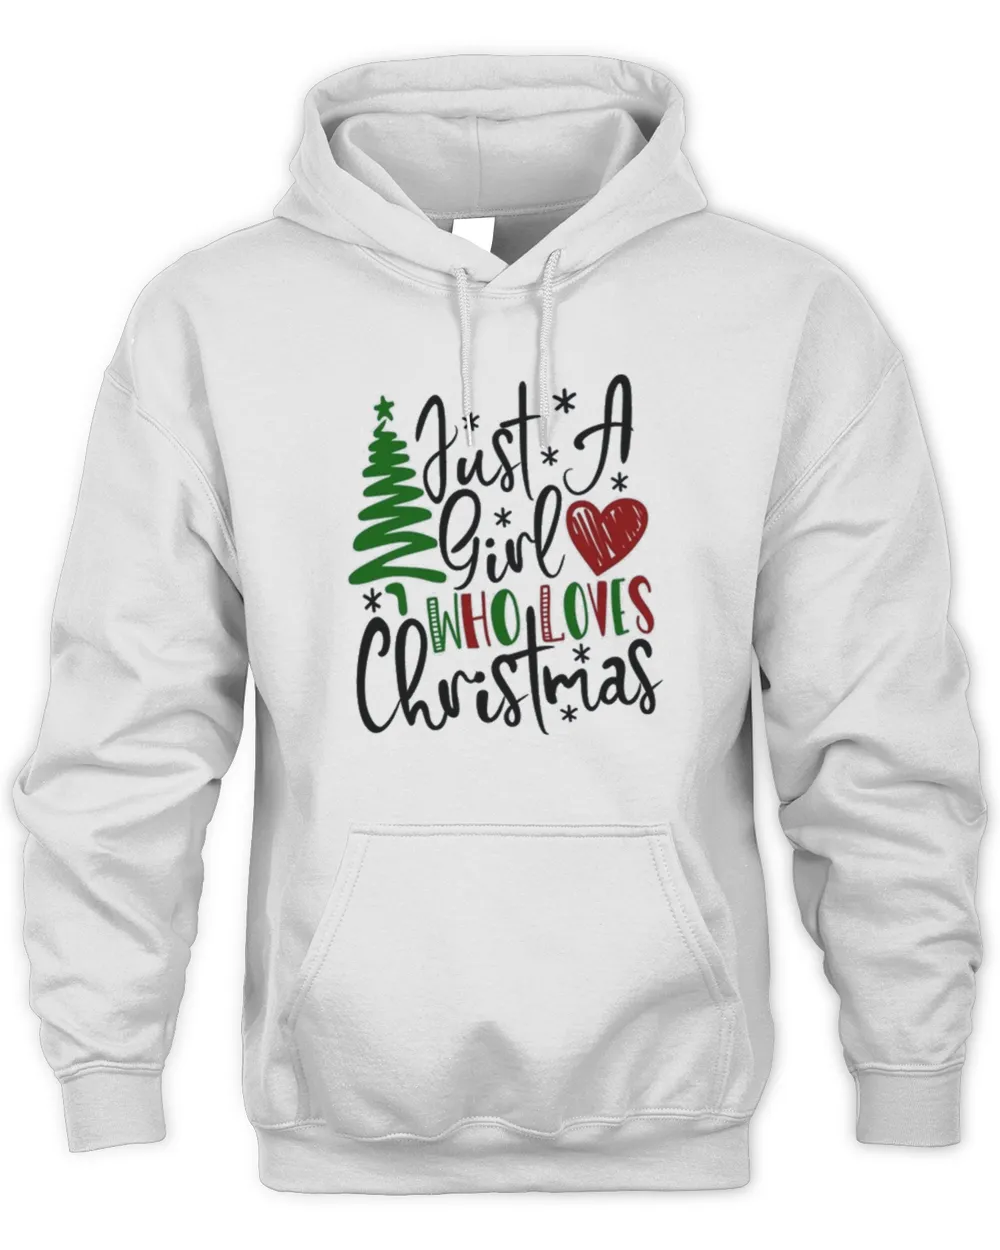 Just a Girl Who Loves Christmas T-Shirt